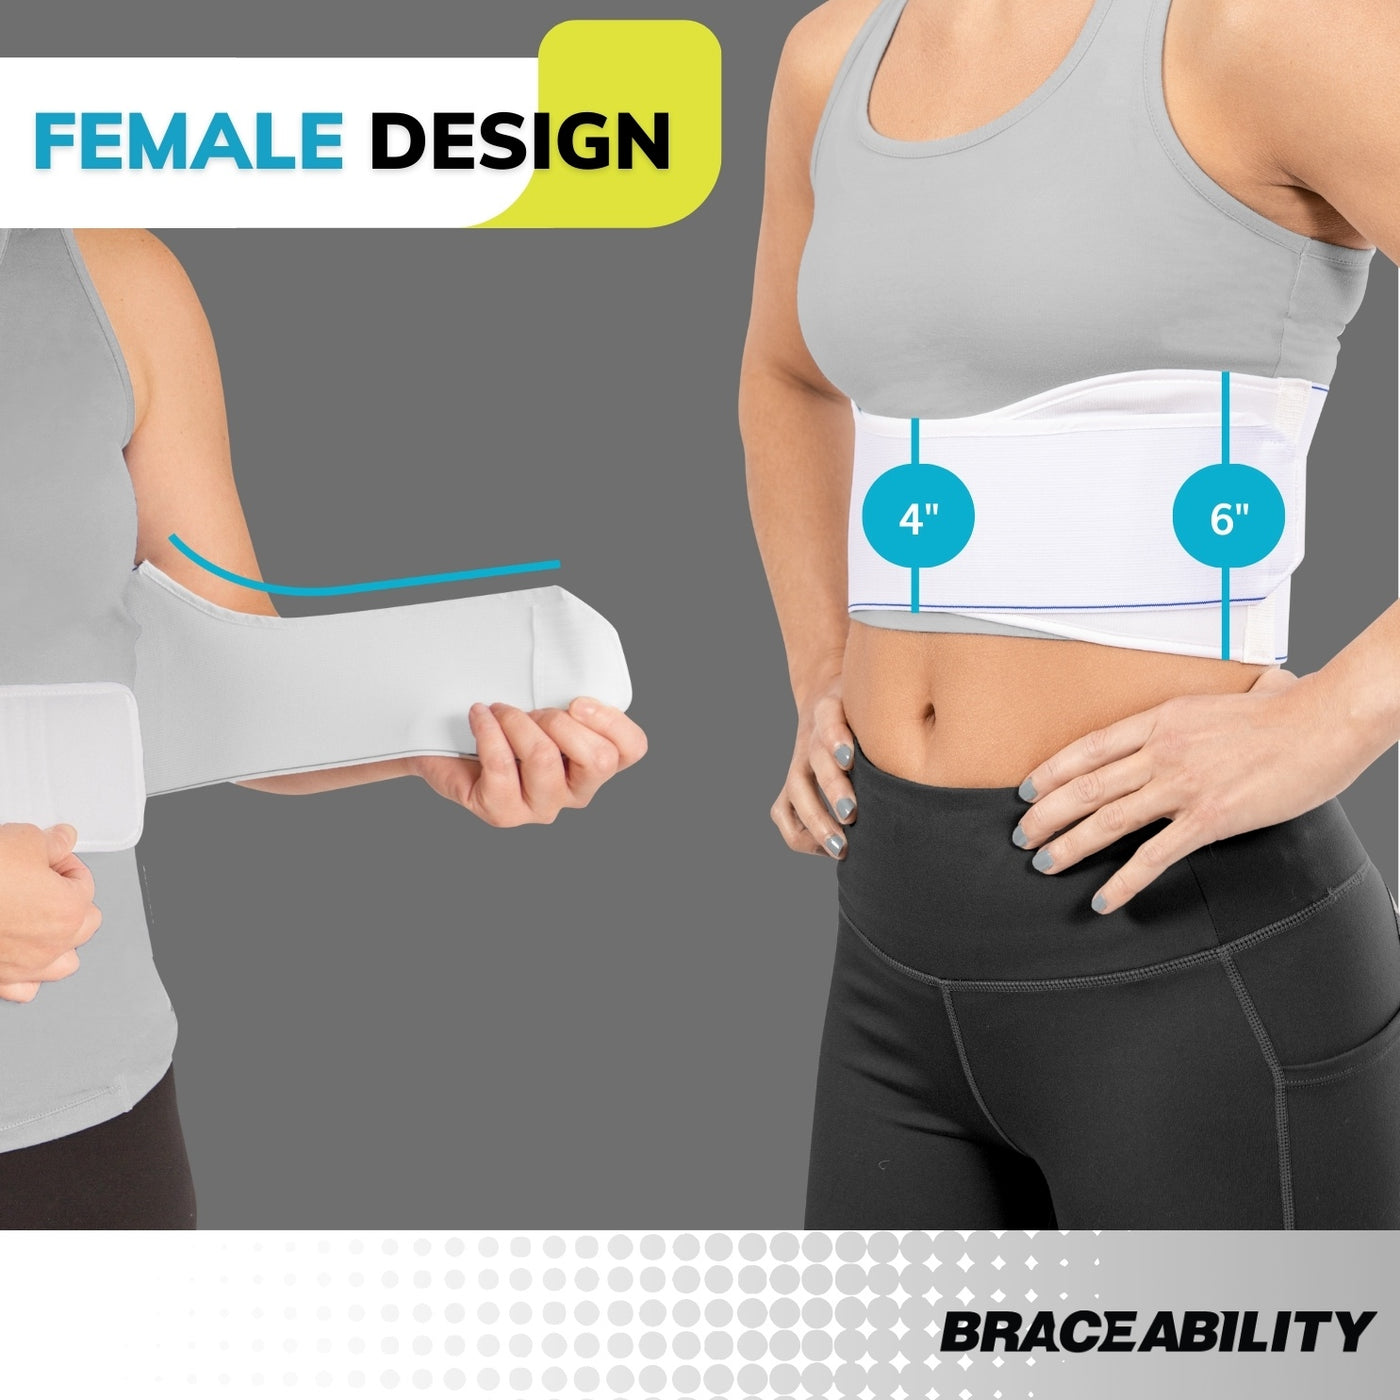 Rib belt for bruised ribs is constructed of breathable, elastic material contoured to fit the female anatomy